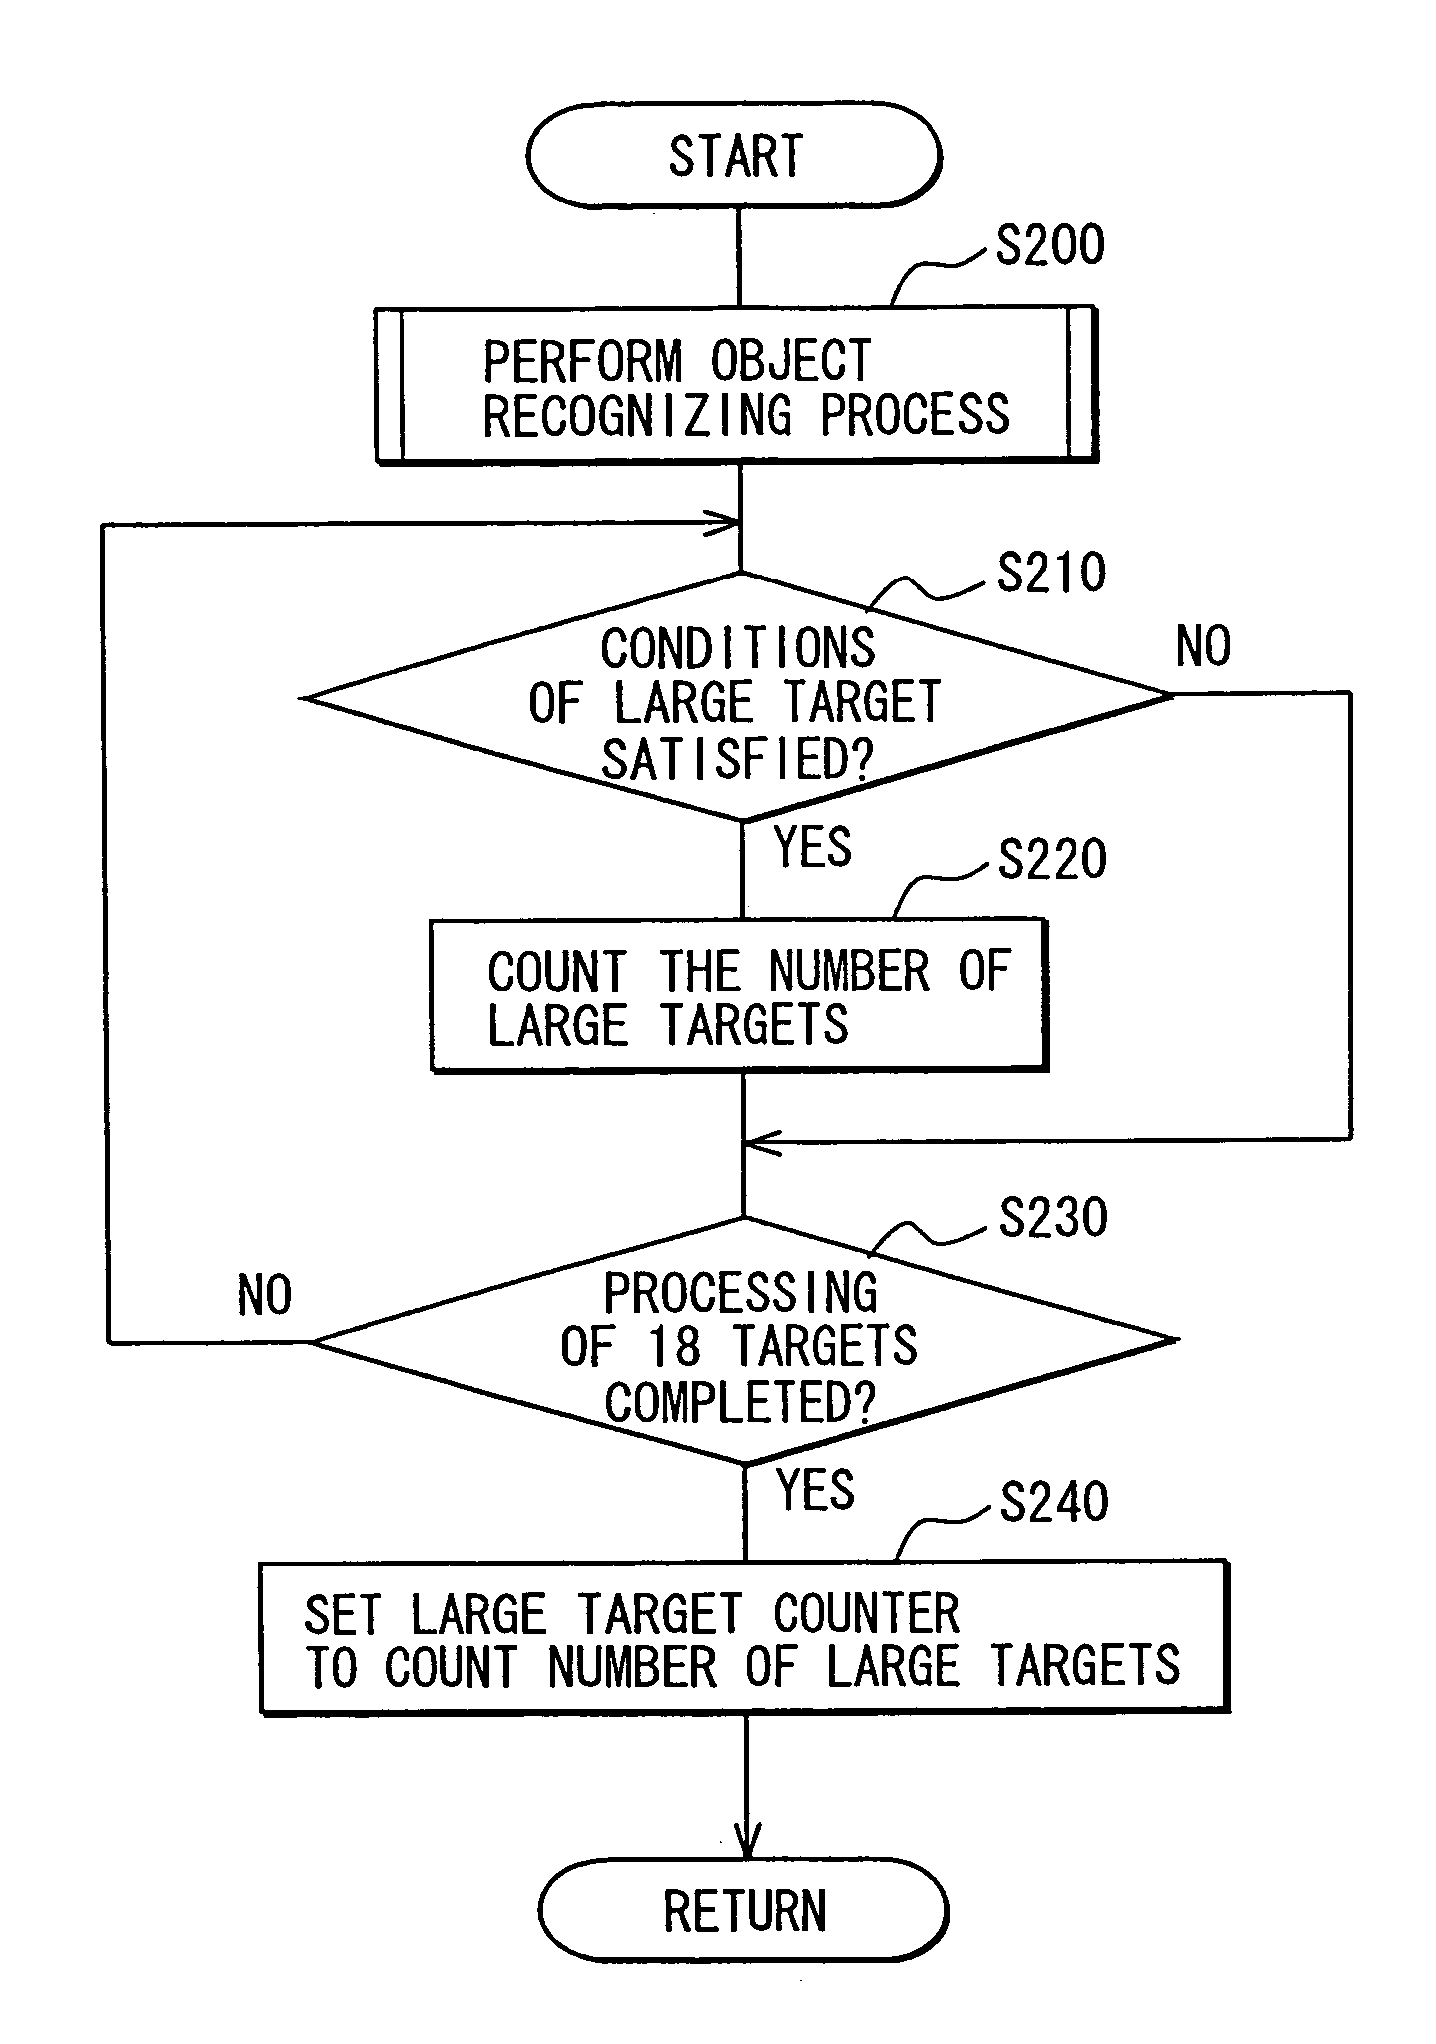 Object recognition system for vehicle